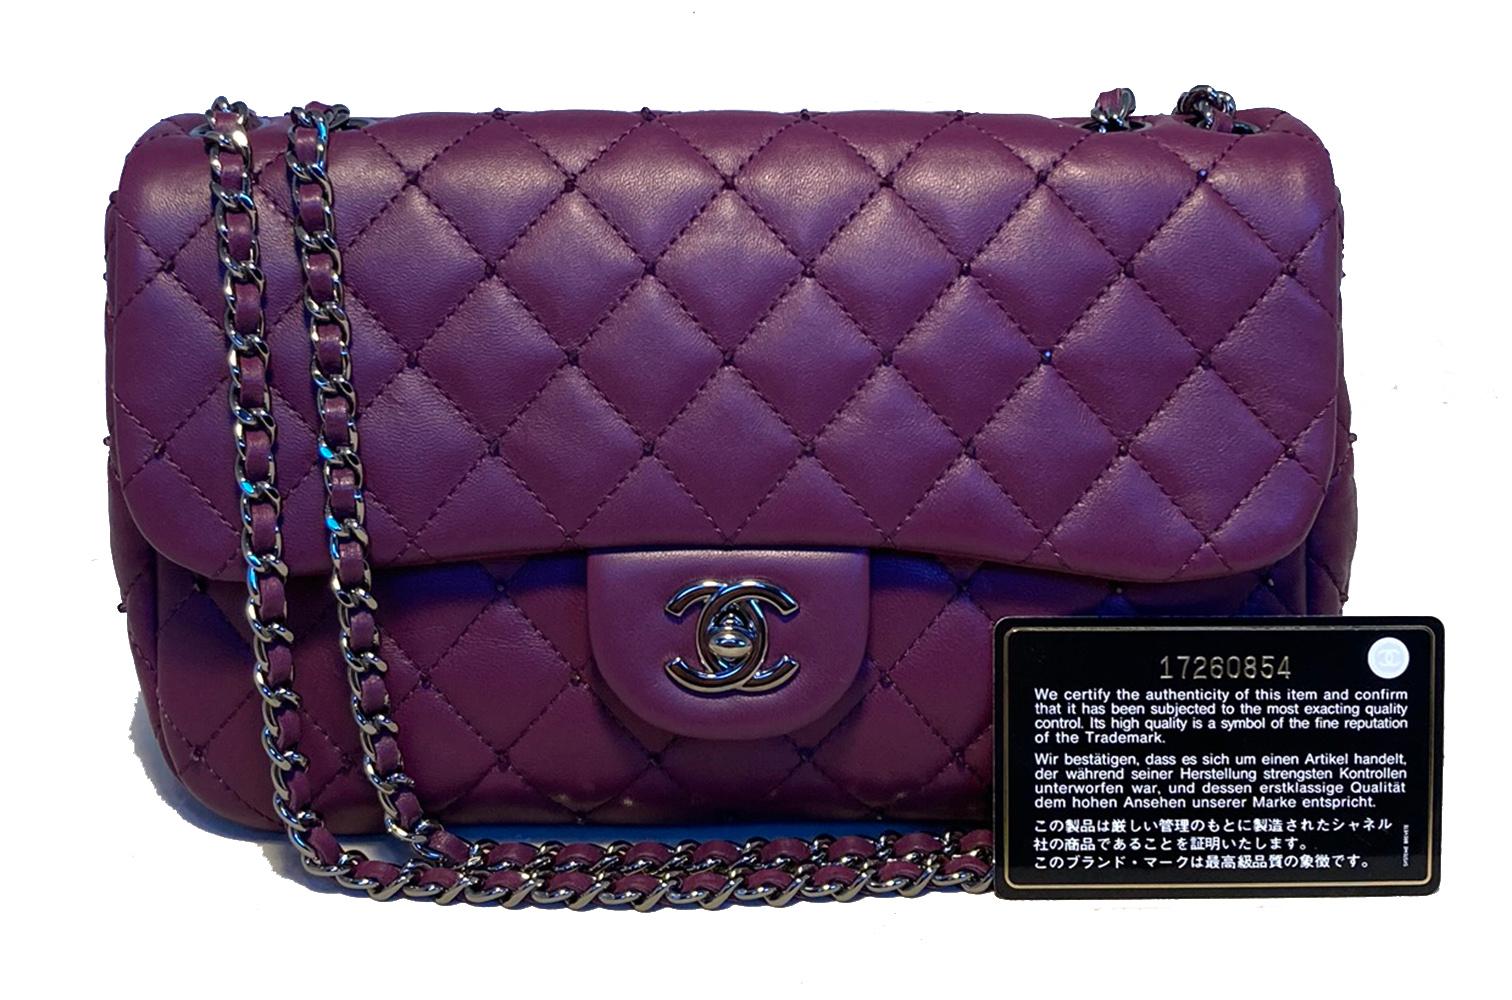 Chanel Purple Beaded Leather Classic Flap Shoulder Bag 3